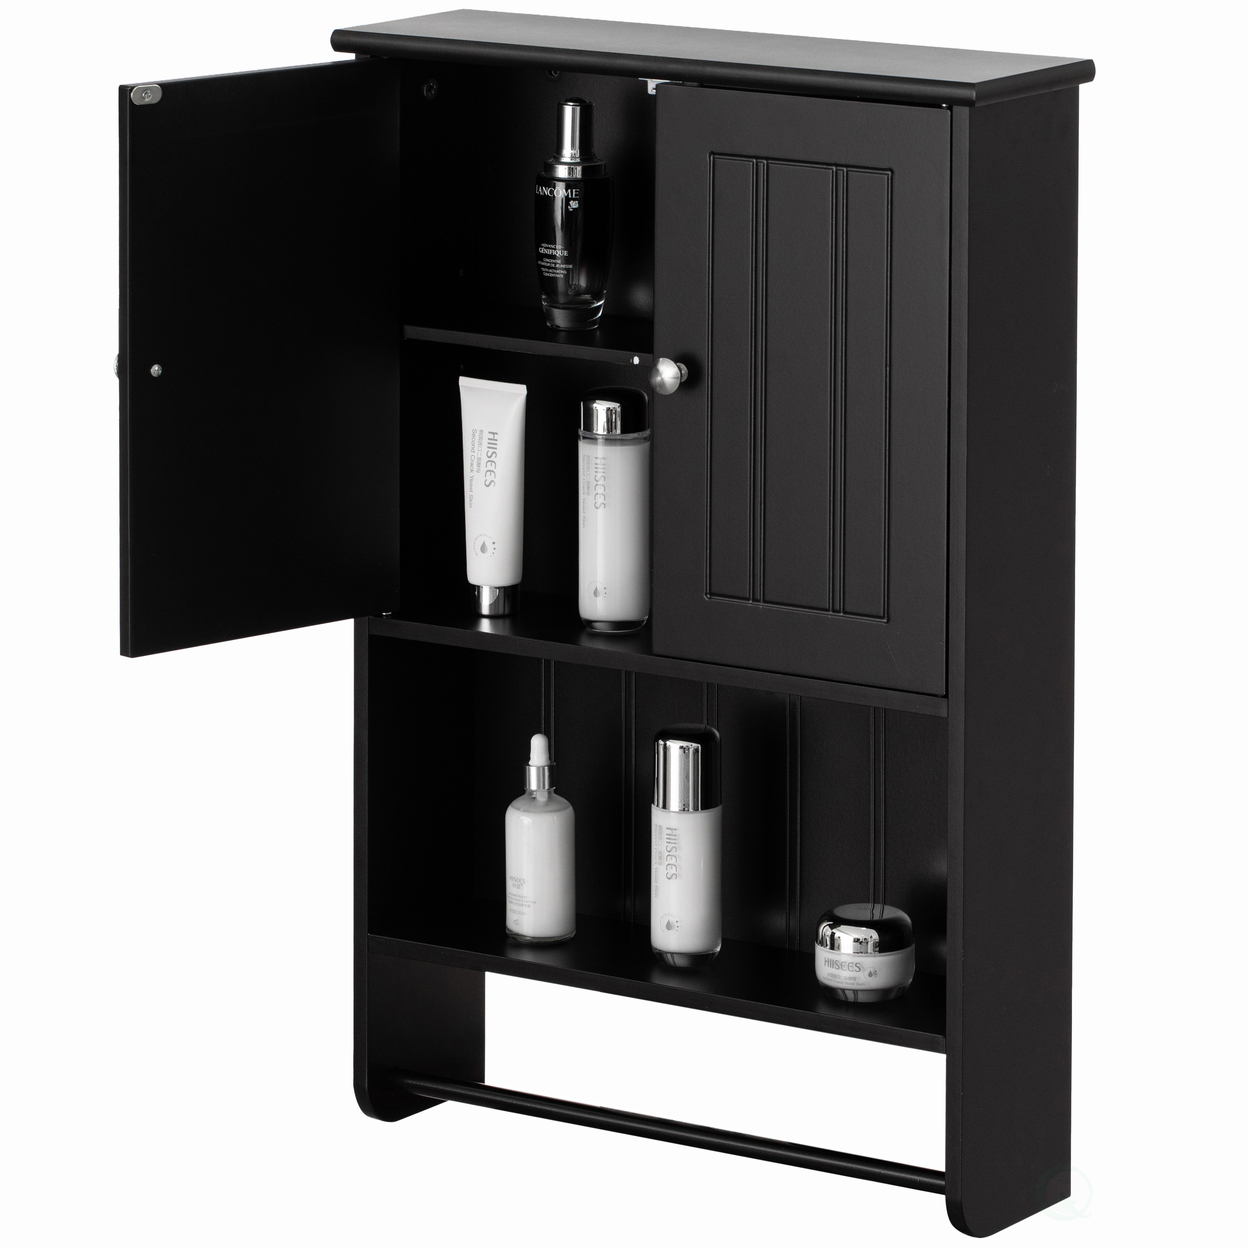 Wall Mount Bathroom Cabinet Wooden Medicine Cabinet Storage Organizer Double Door With 2 Shelves, And Open Display Shelf, With Towel Bar - W